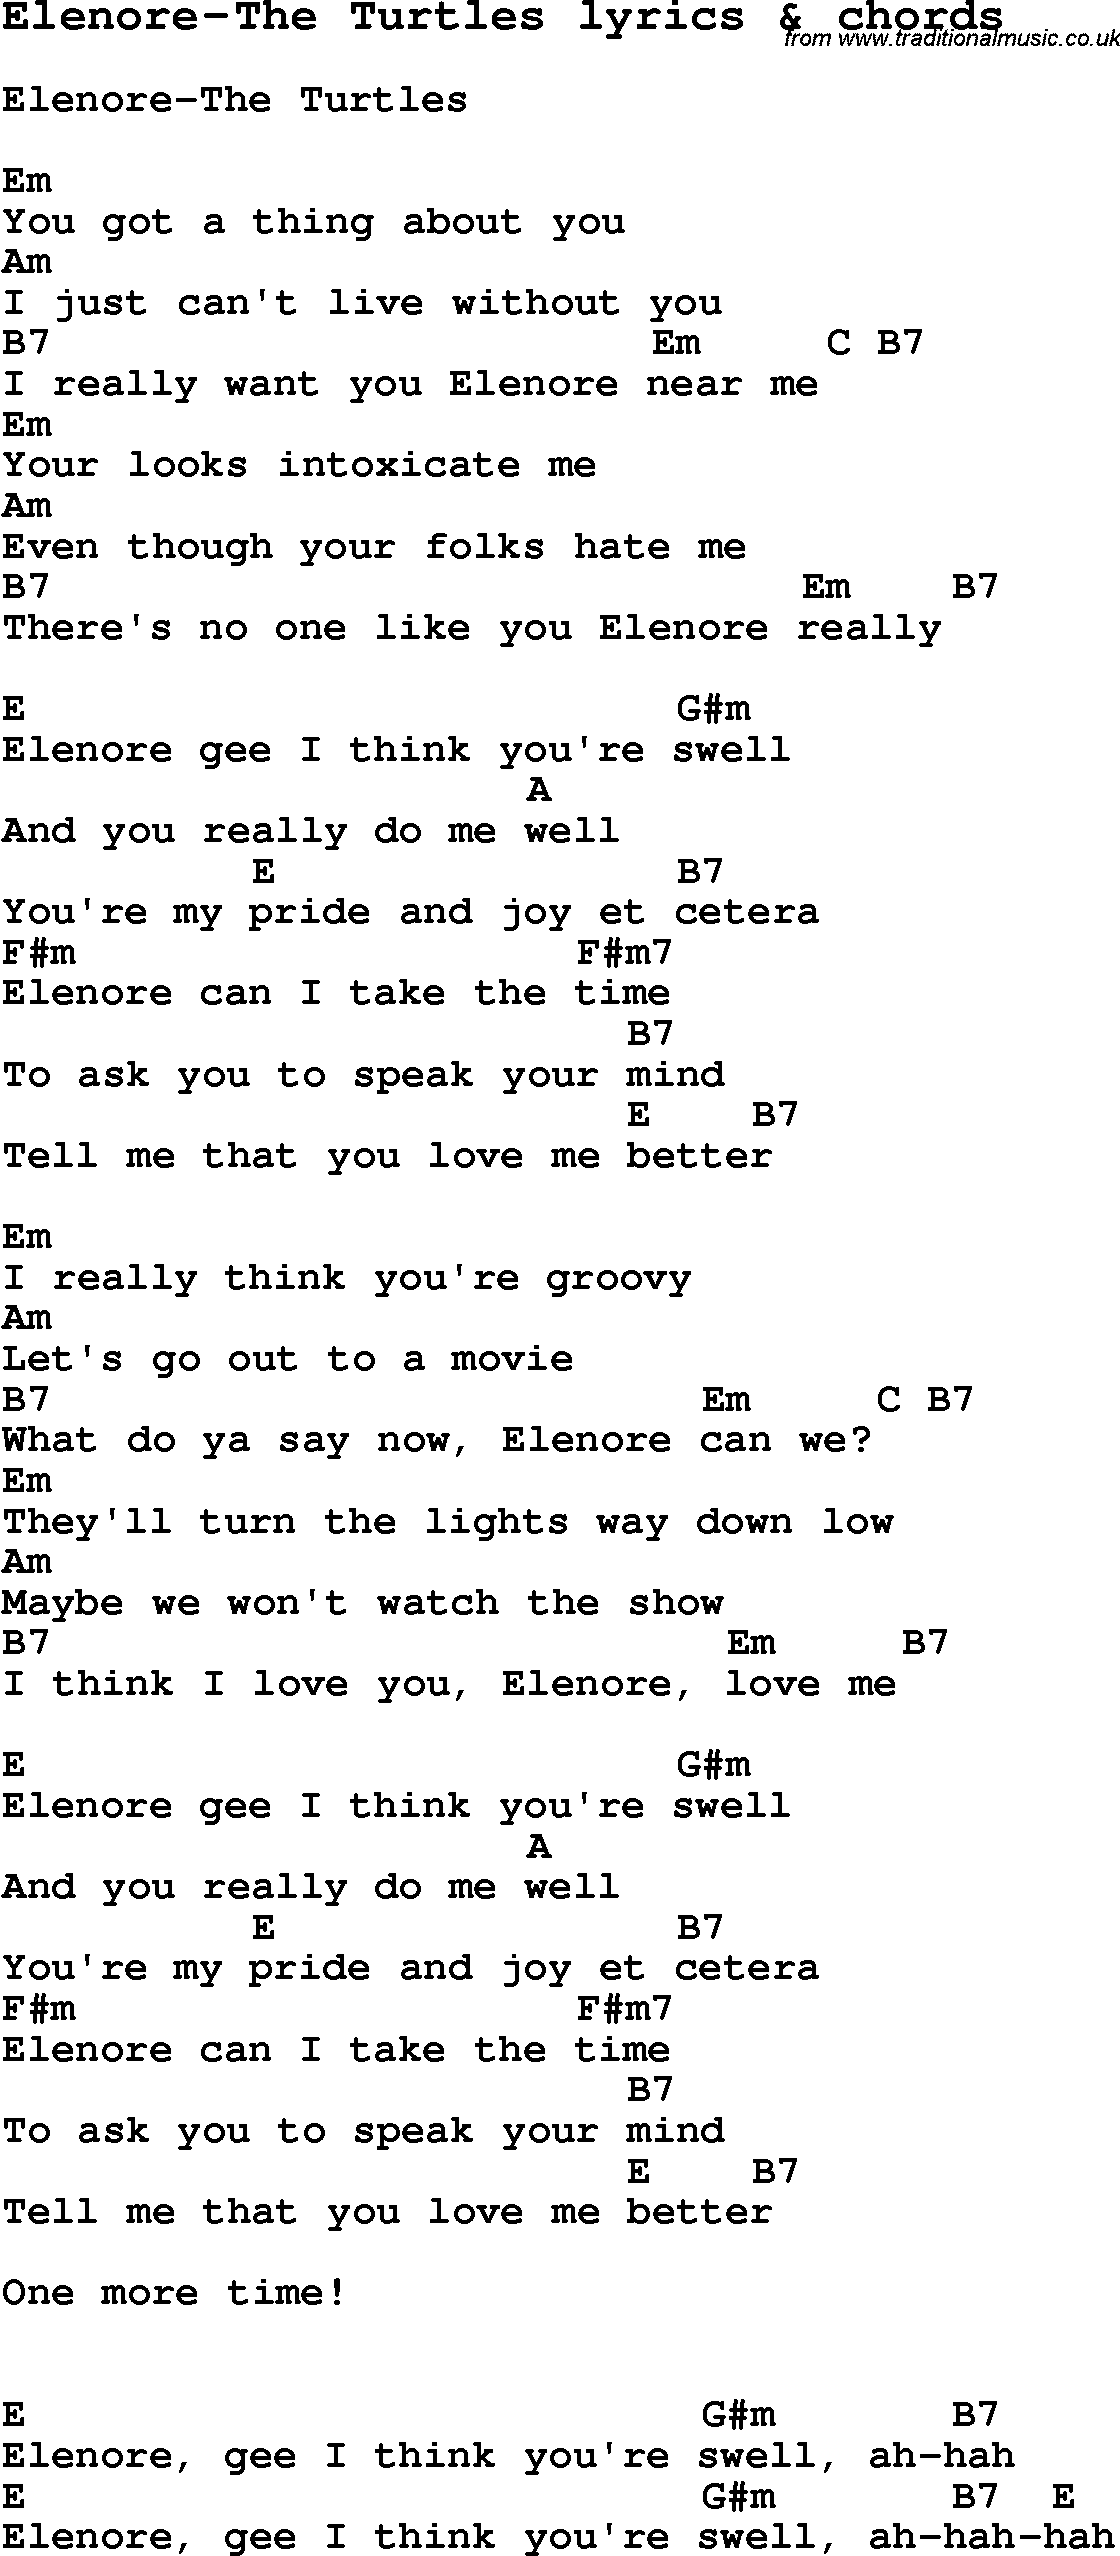 Love Song Lyrics for: Elenore-The Turtles with chords for Ukulele, Guitar Banjo etc.